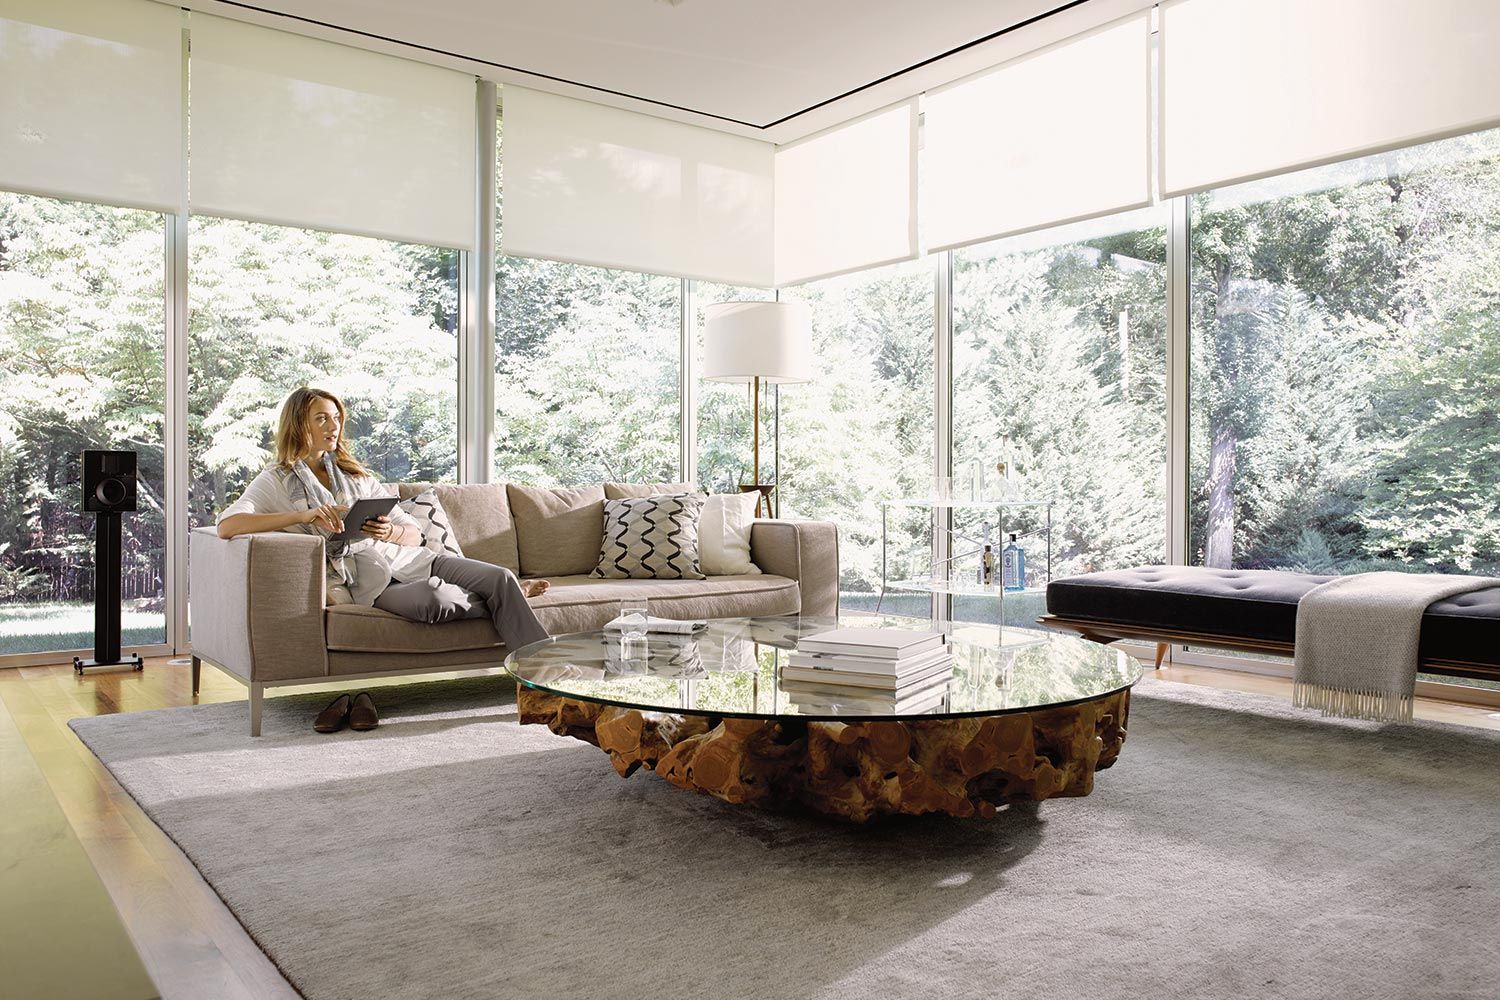 A woman sits on a beige couch in a modern living room with floor-to-ceiling windows, holding a tablet and relaxing. The room features a unique glass coffee table with a wooden base and a light grey rug.